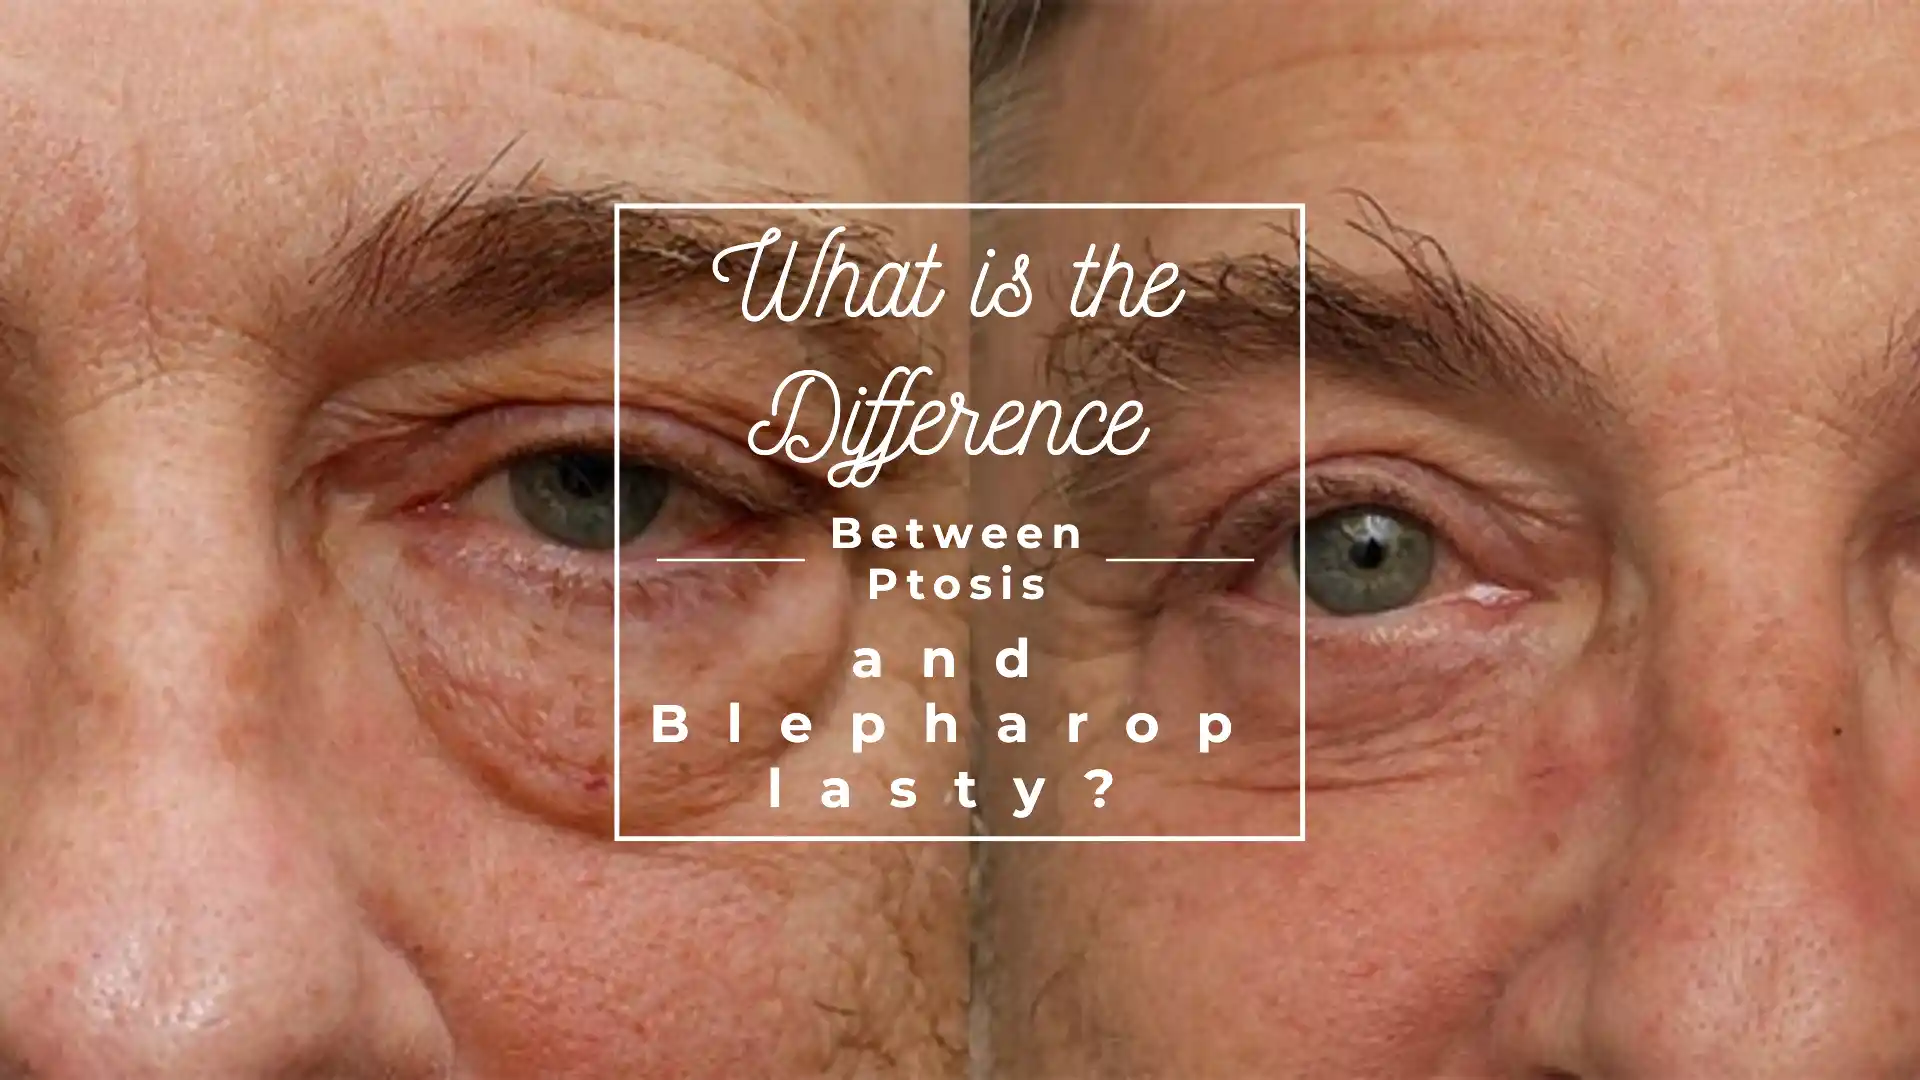 What is the Difference Between Ptosis and Blepharoplasty?